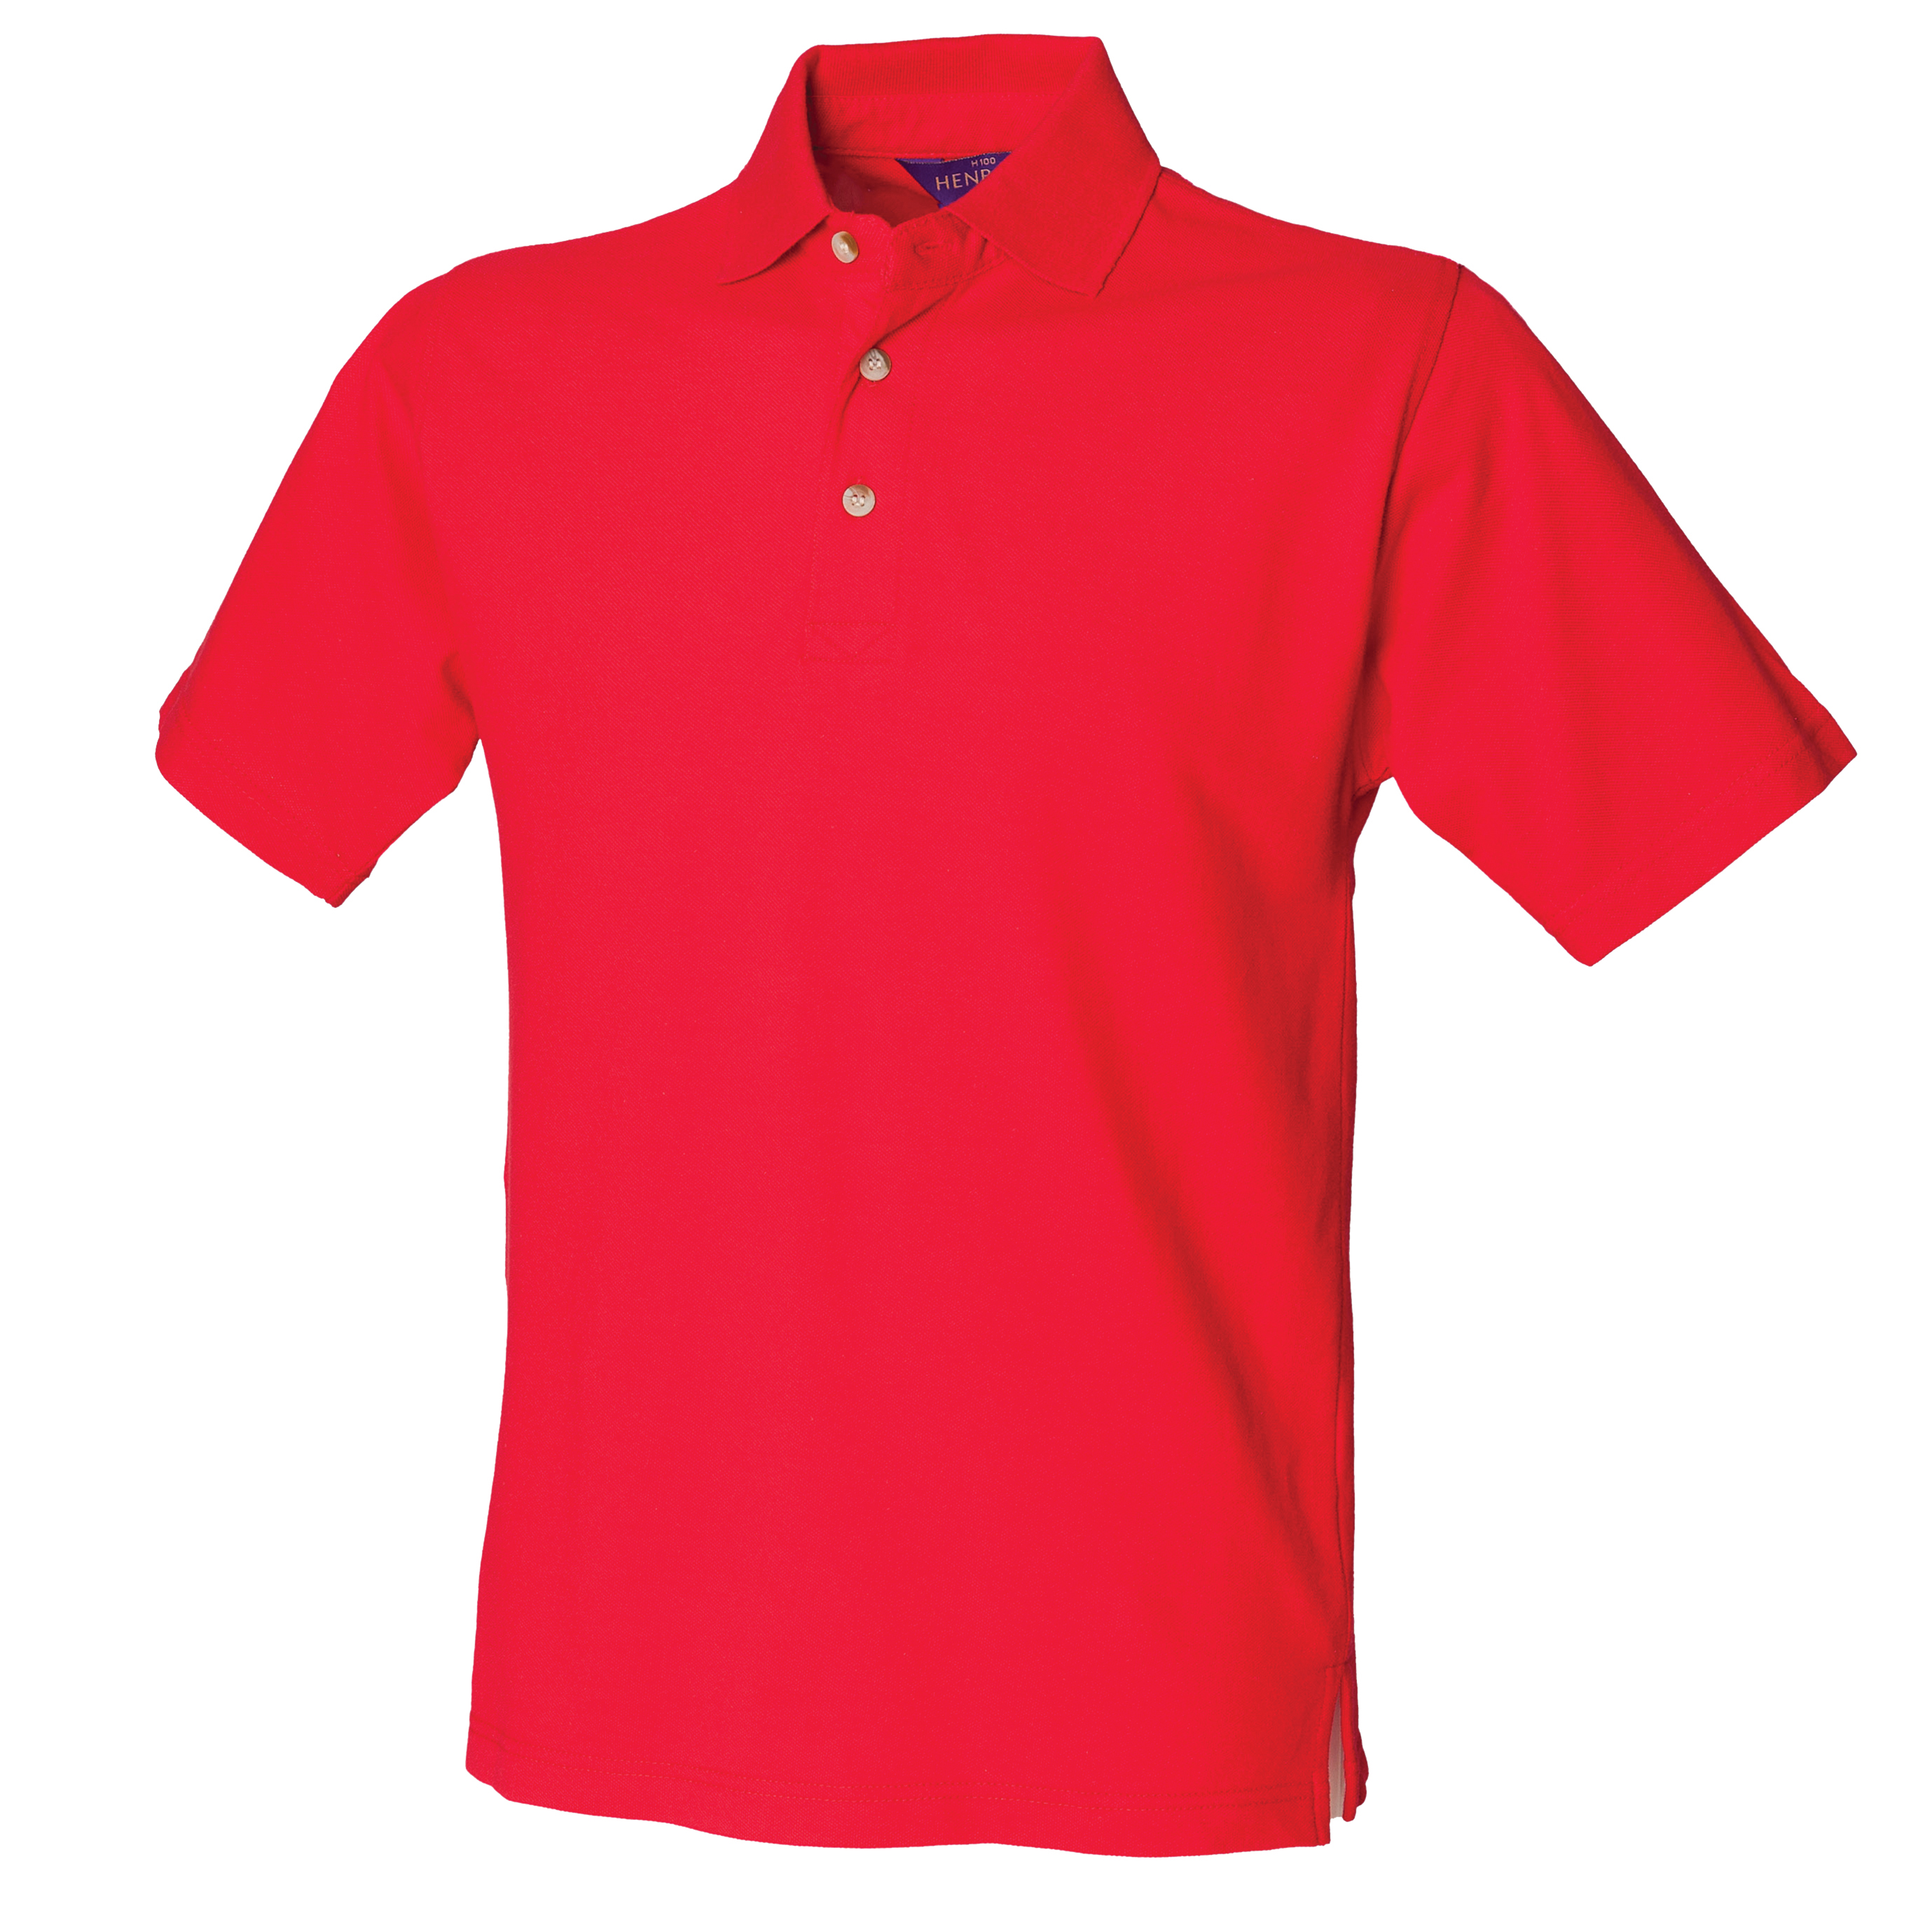 ax-httpswebsystems.s3.amazonaws.comtmp_for_downloadhenbury-classic-cotton-pique-polo-stand-up-classic-red.jpg